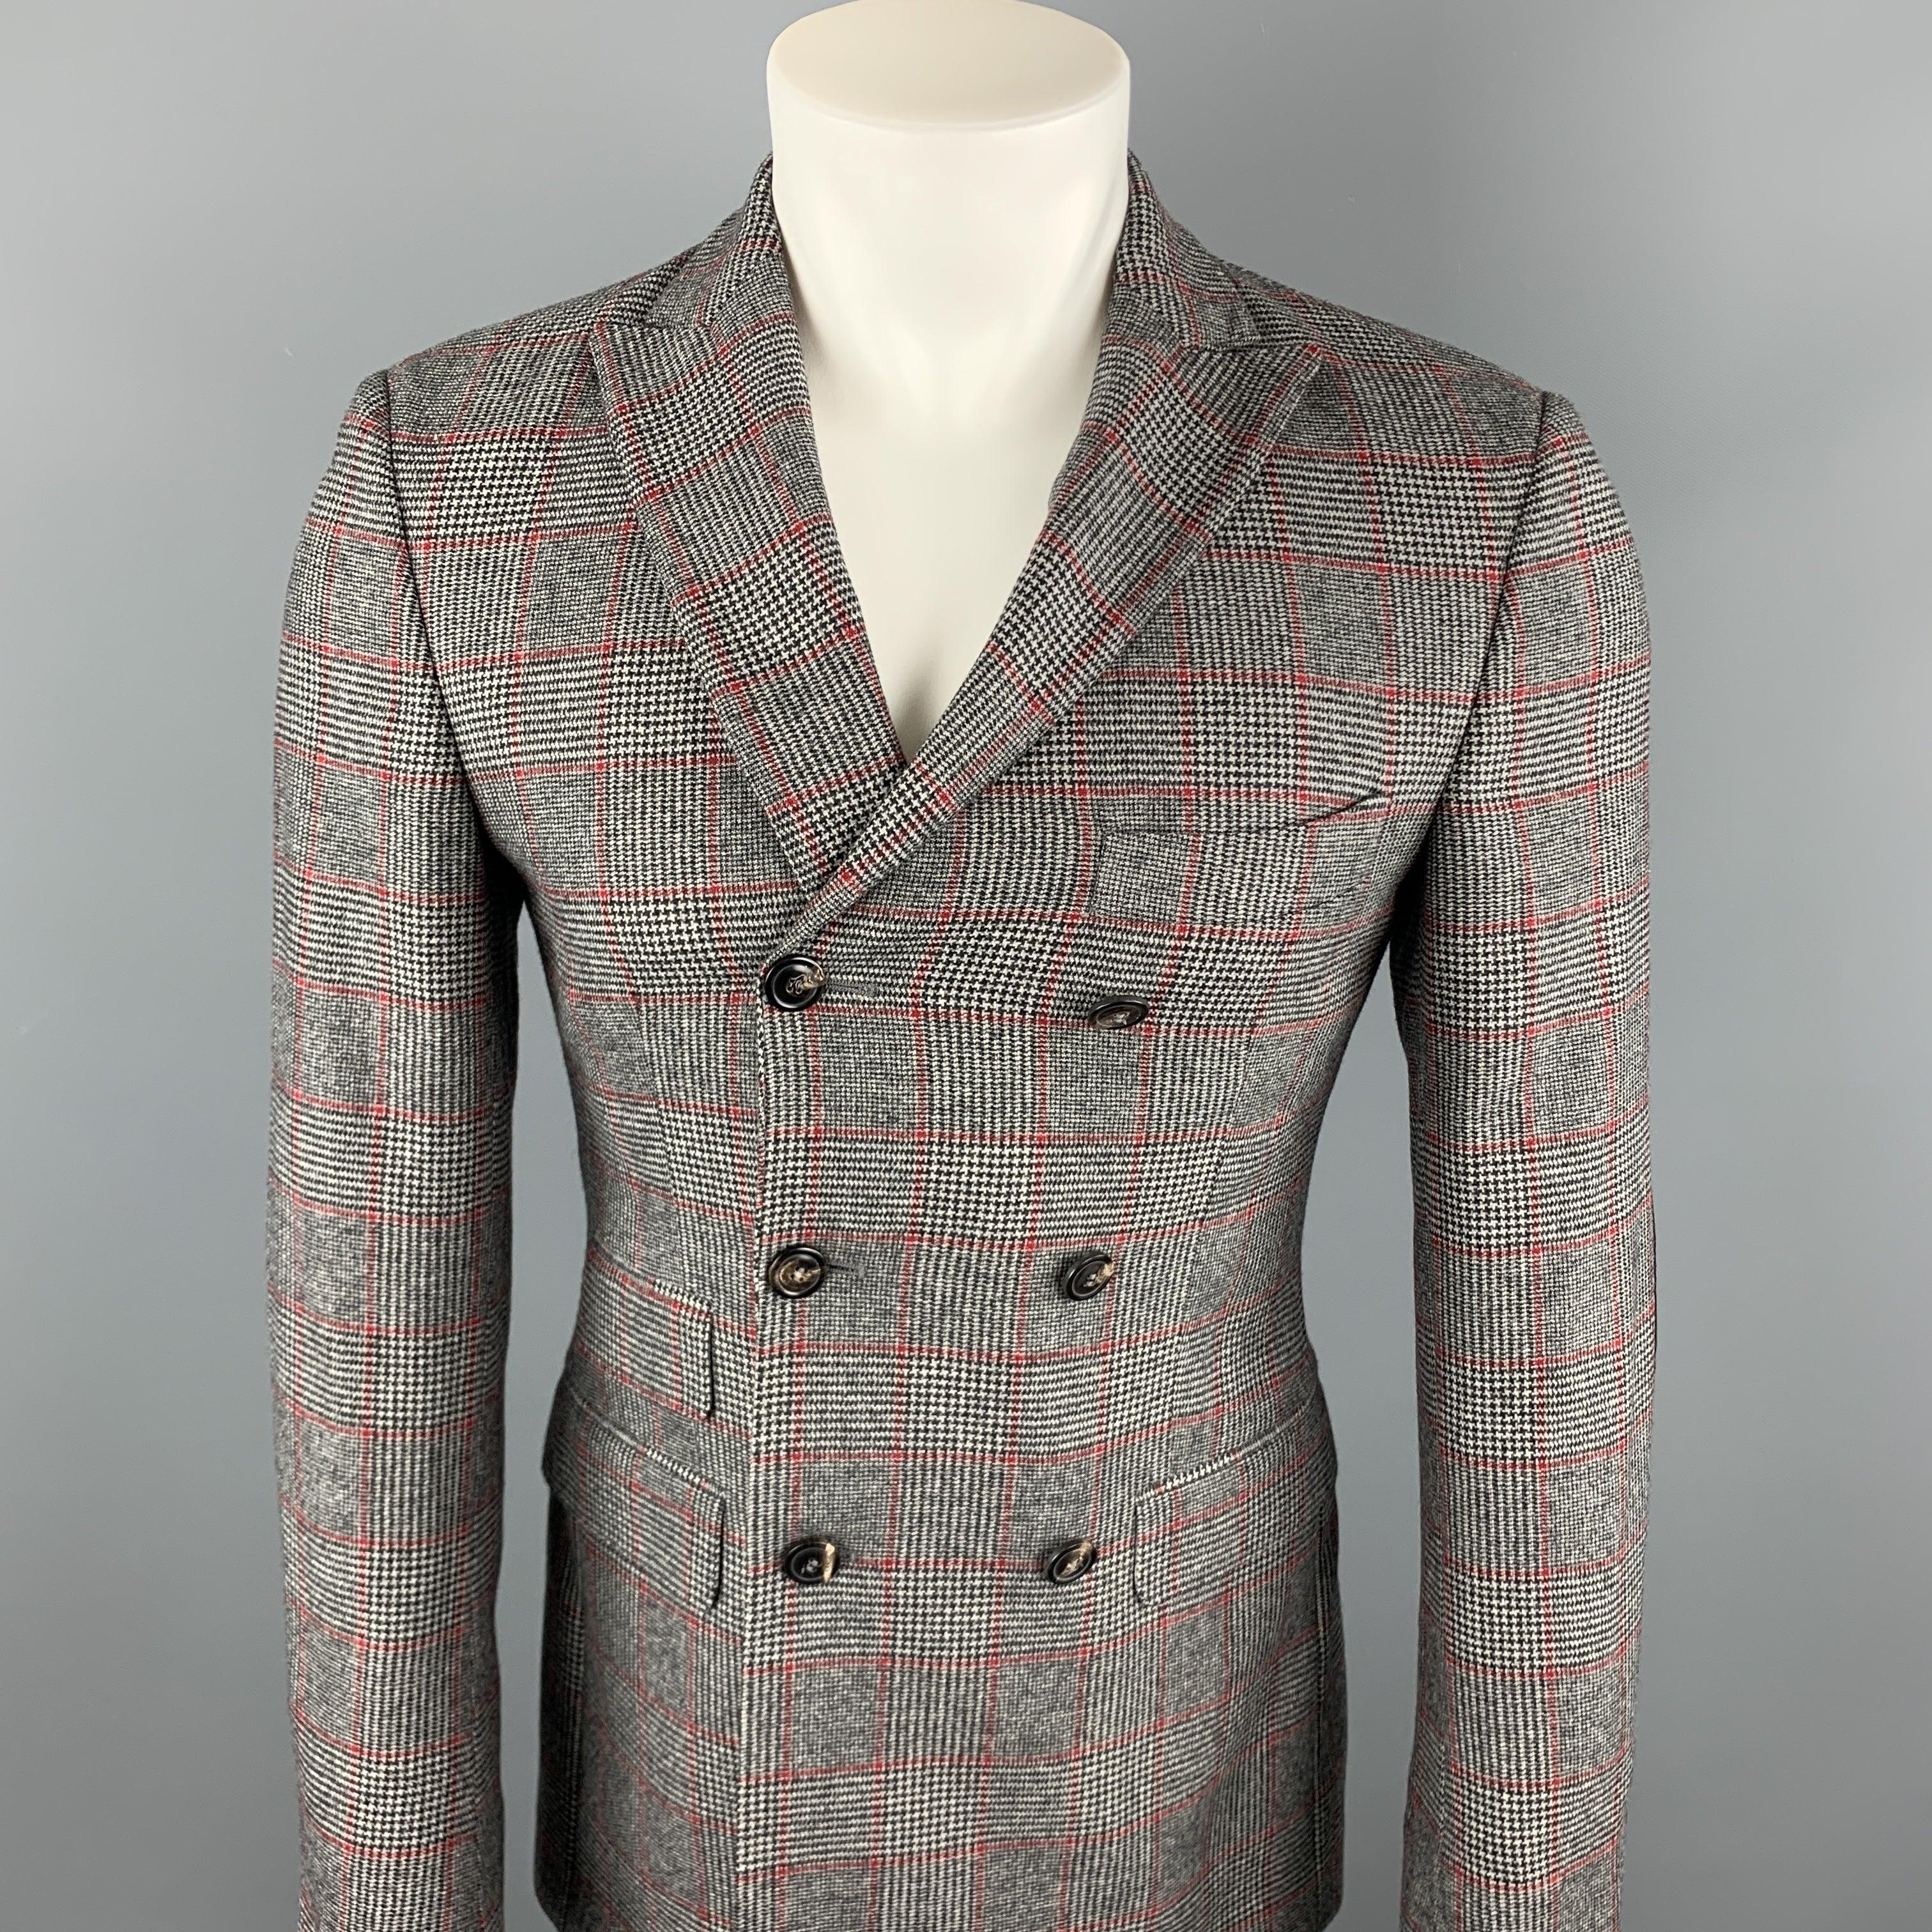 MICHAEL BASTIAN sport coat comes in a black & white plaid wool featuring a peak lapel style, suede elbow patches, flap pockets, and a double breasted closure. Made in Italy.
Excellent
Pre-Owned Condition. 

Marked:   46 

Measurements: 
 
Shoulder: